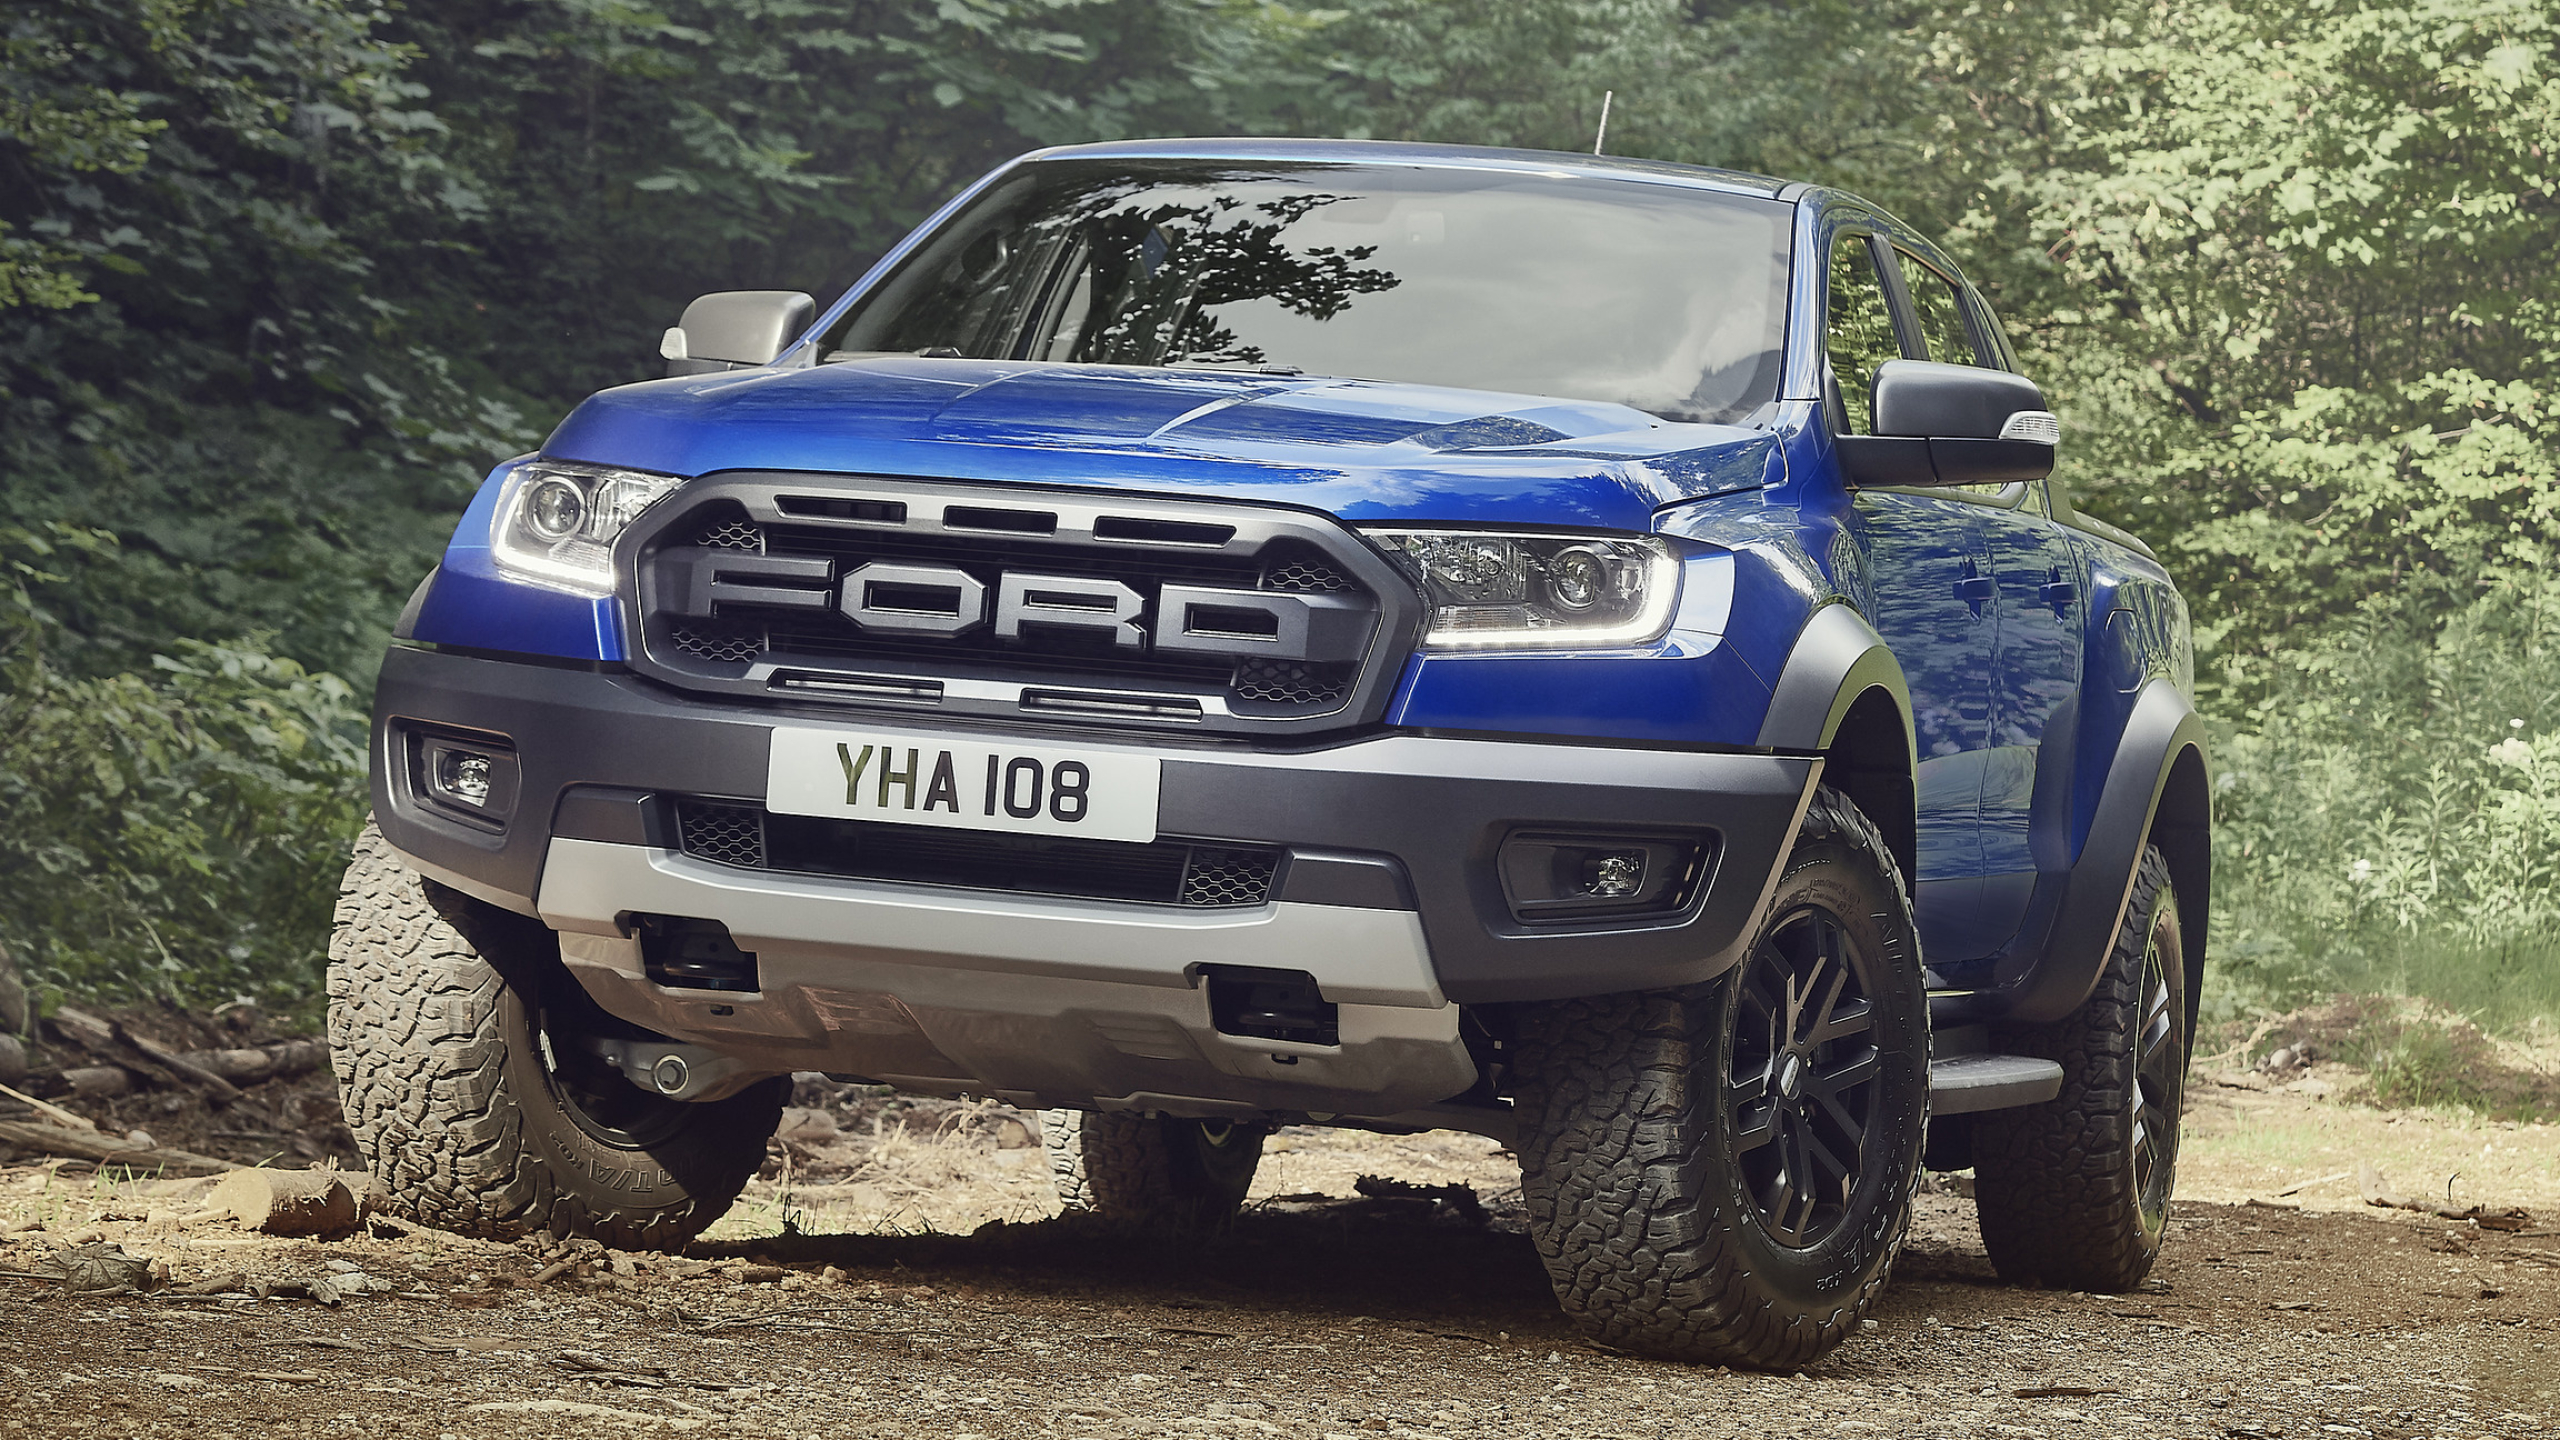 Ford Ranger: Raptor, The first compact pickup truck designed by the company. 2560x1440 HD Background.